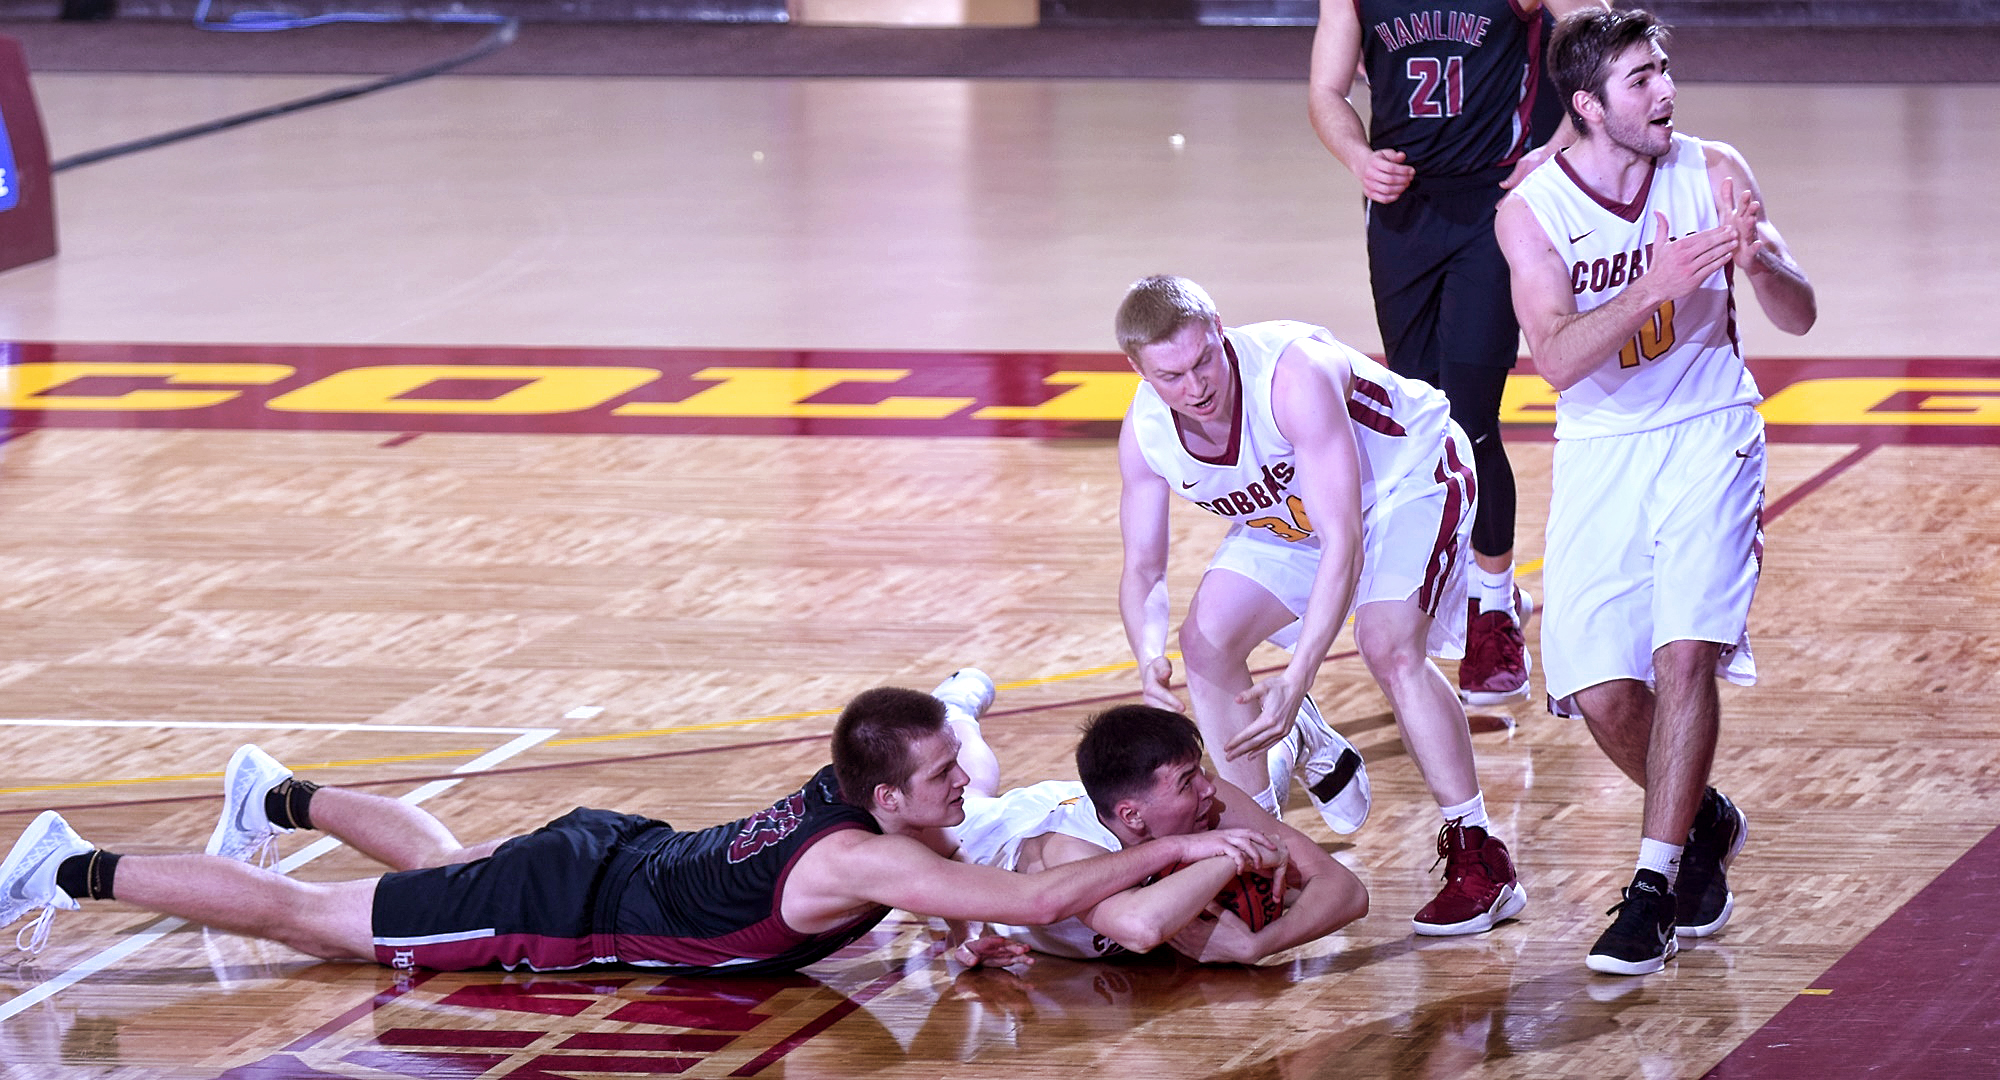 Senior Jordan Davis dives on the floor to grab the ball as teammate Tommy Schyma calls for timeout late in the second half of the Cobbers' 68-62 win over Hamline.